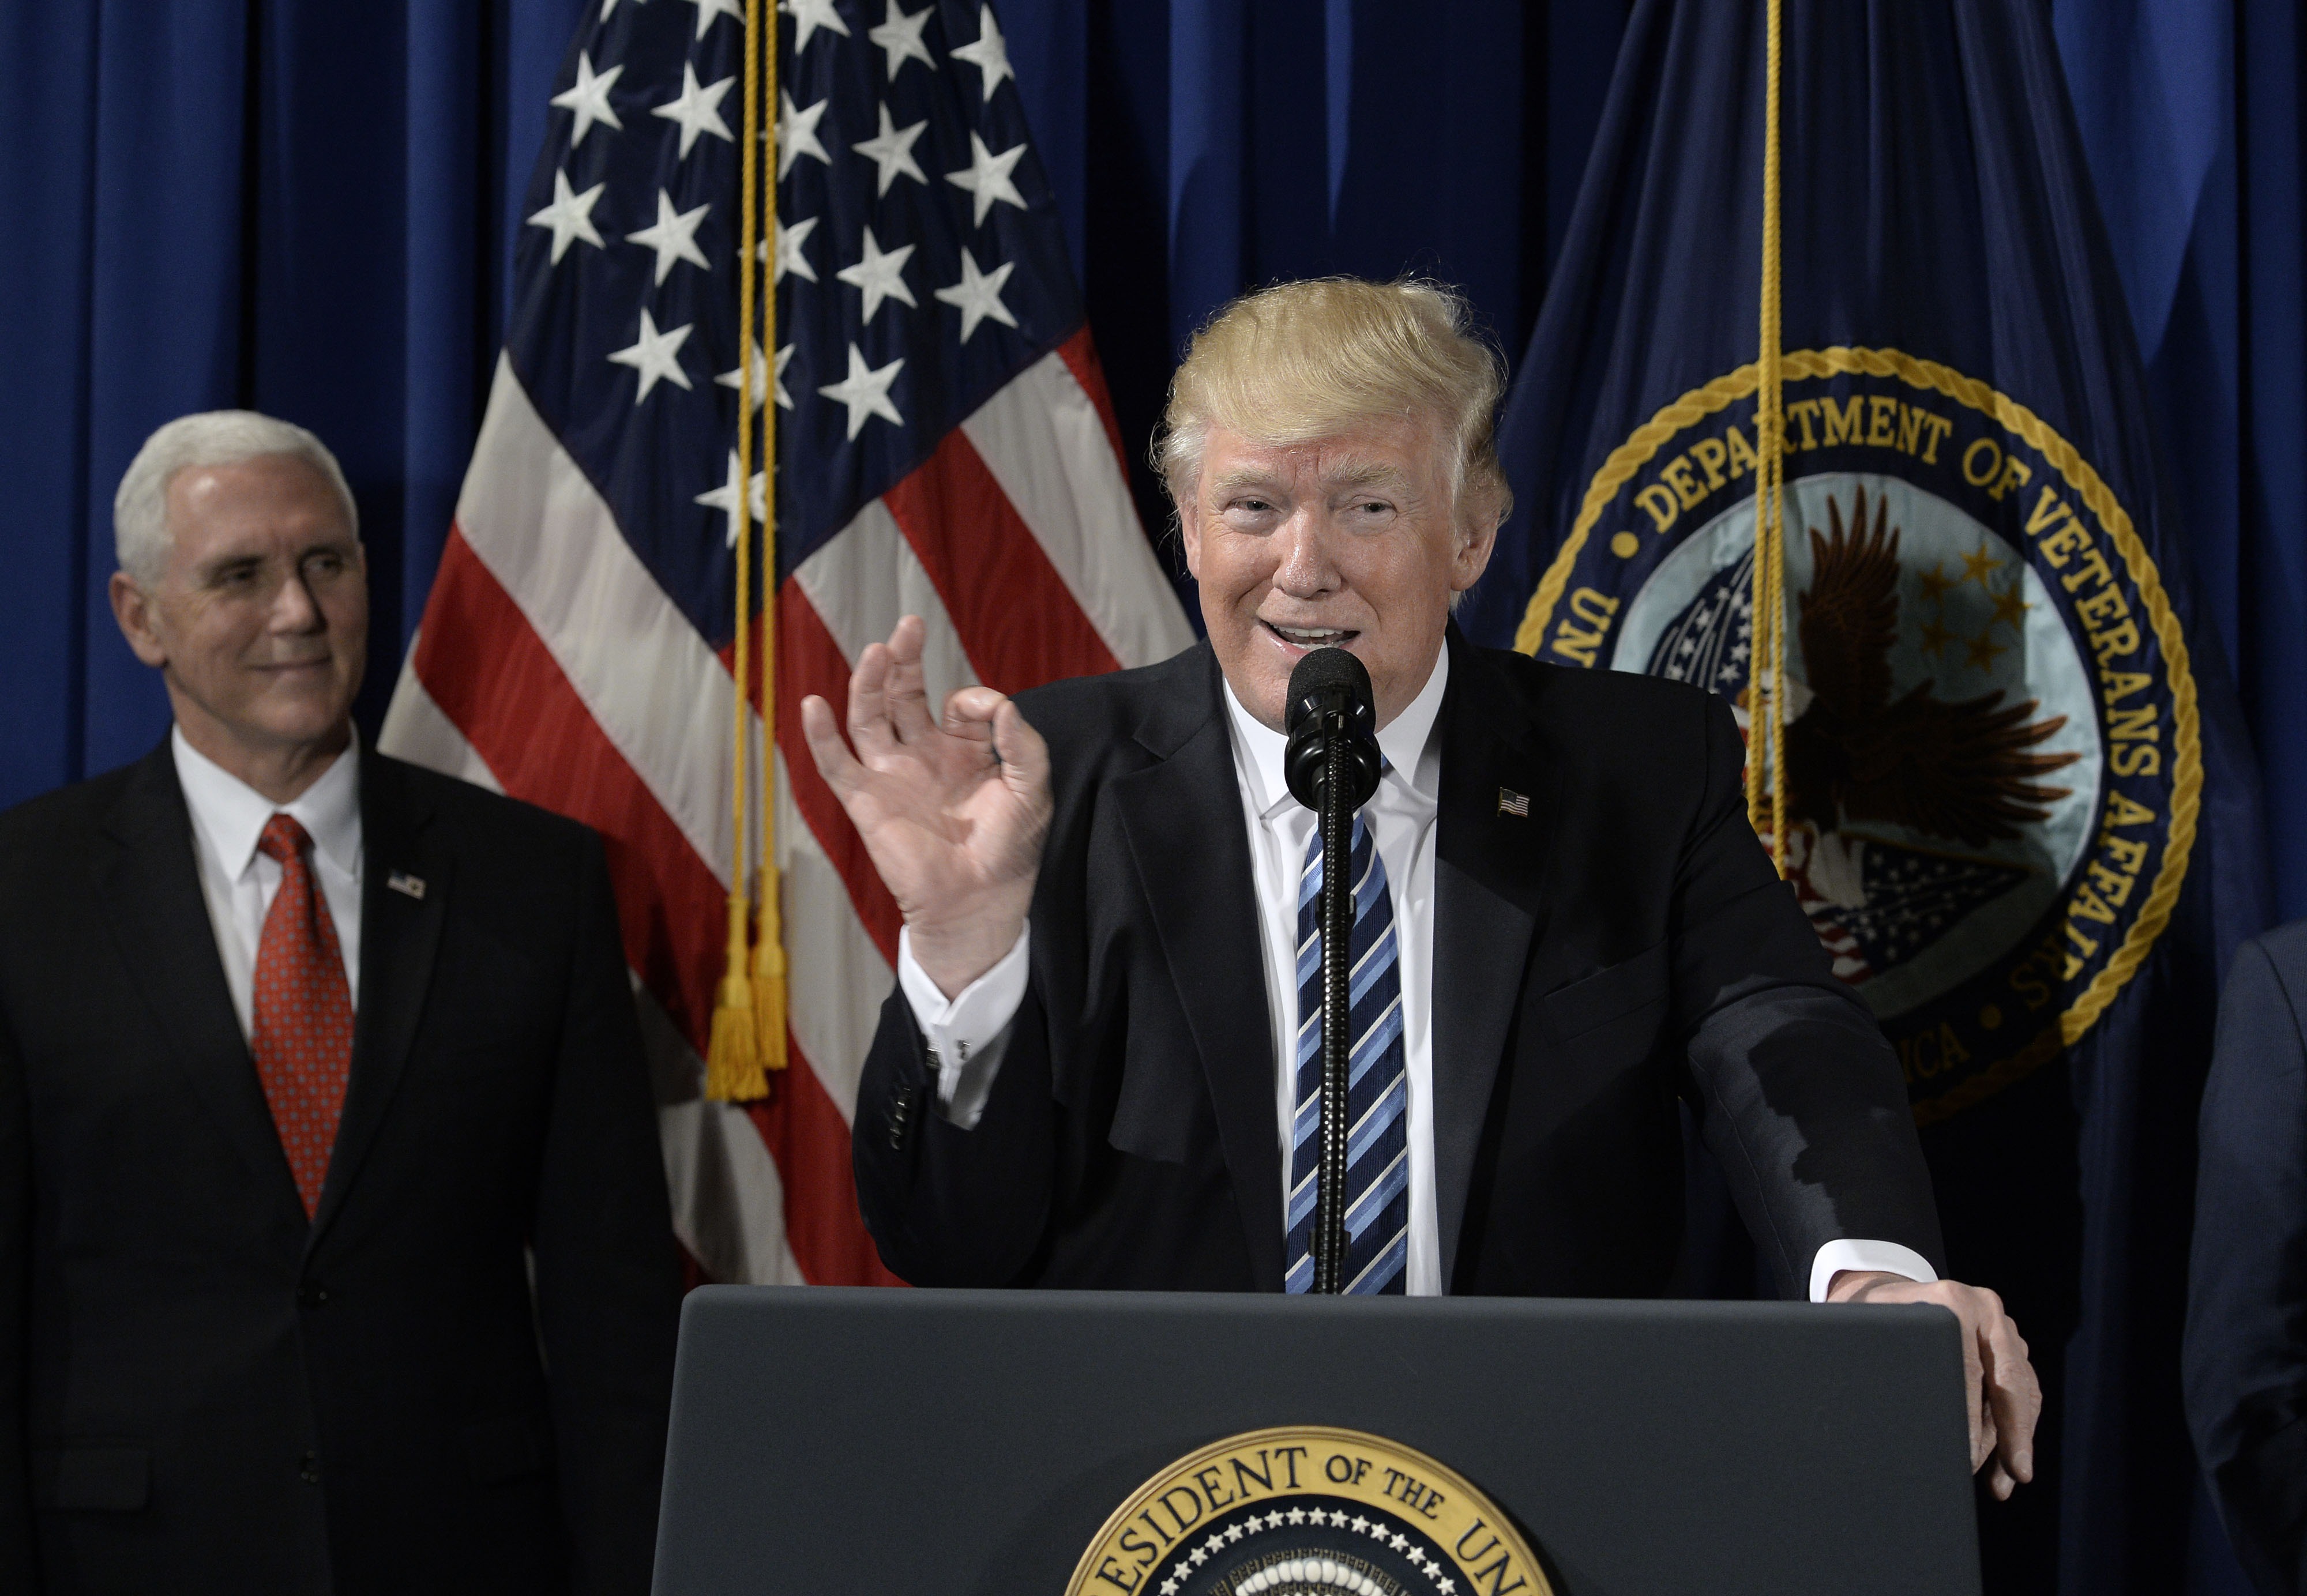 President Trump speaks at the Department of Veterans Affairs before signing an Executive Order on April 27, 2017 in Washington, DC. (Pool/Getty Images)